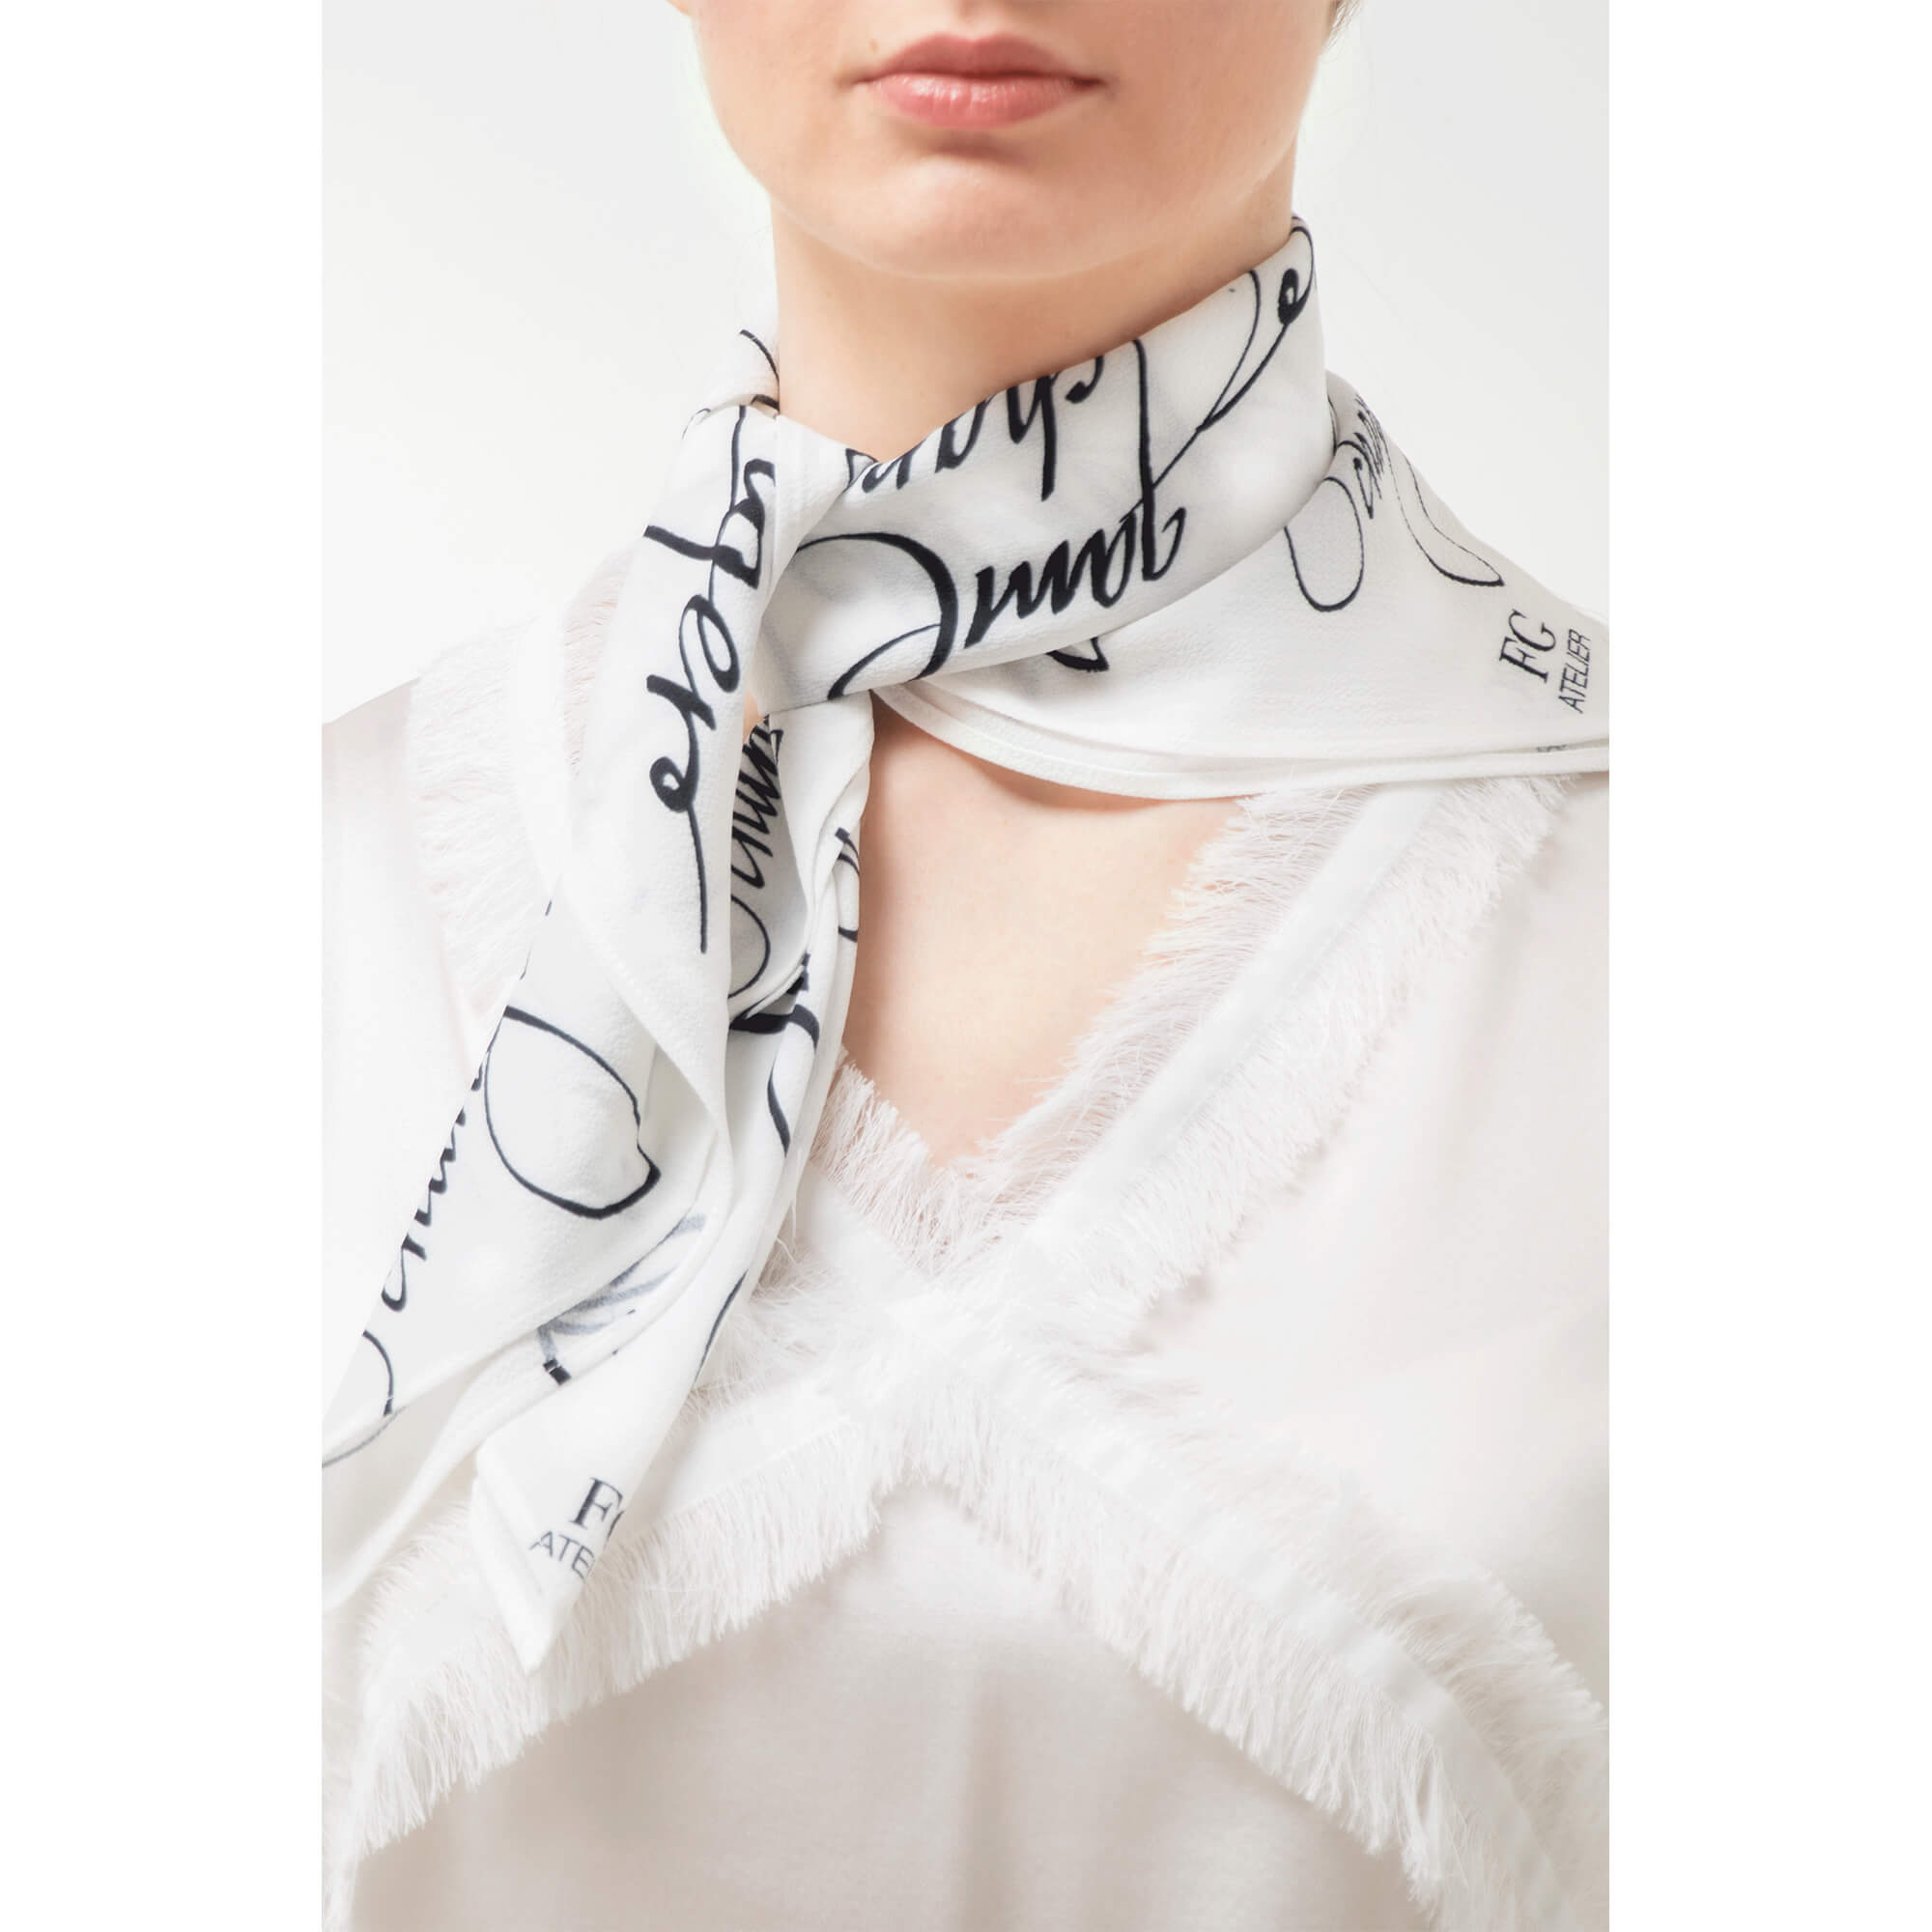 Black and White Calligraphy Print Scarf Be The Game Changer